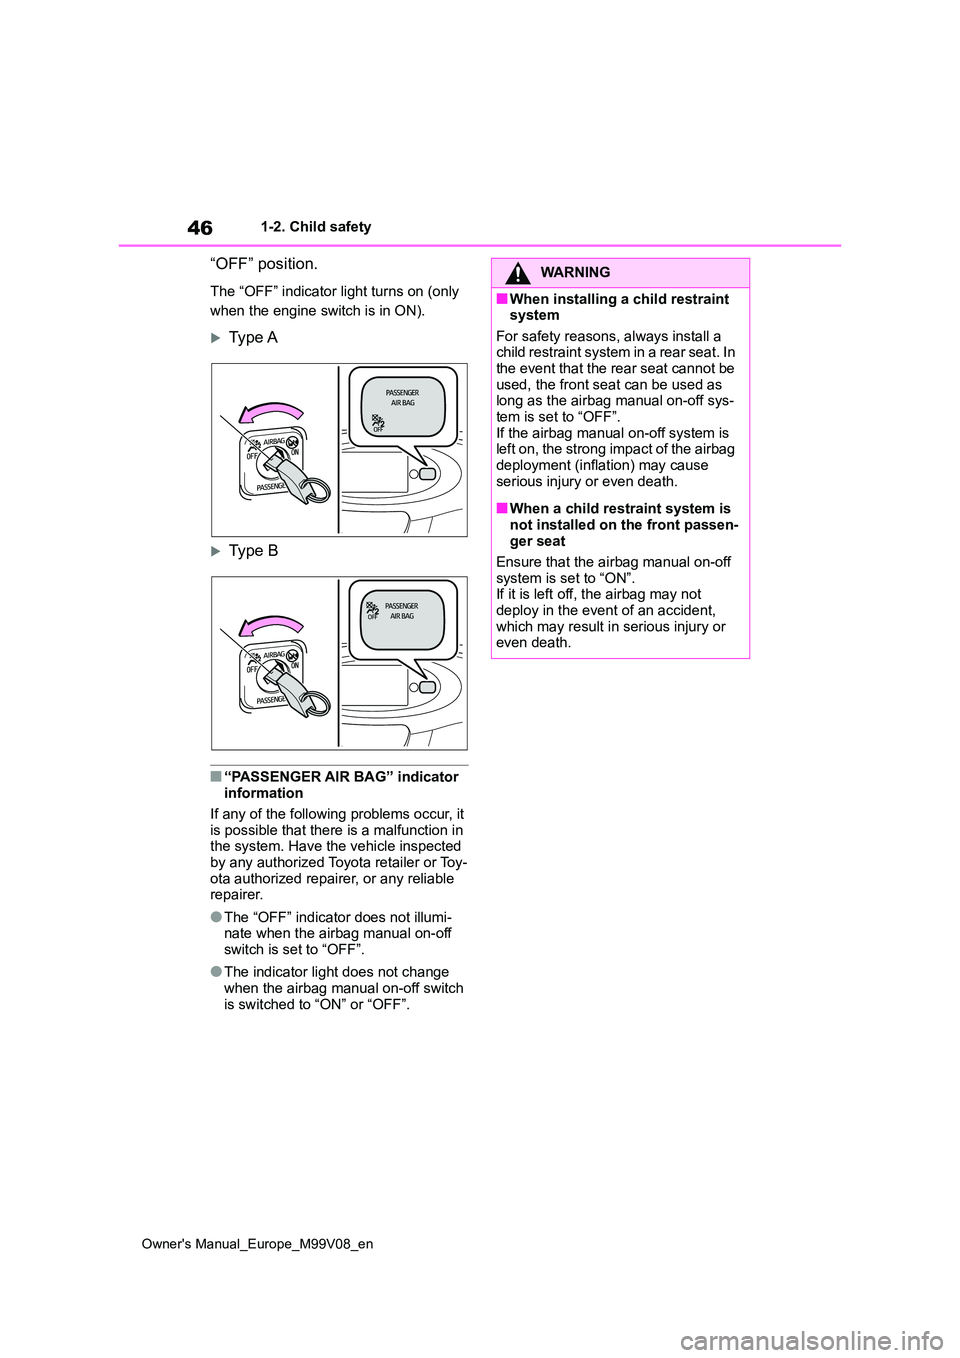 TOYOTA AYGO X 2022  Owners Manual (in English) 46
Owner's Manual_Europe_M99V08_en
1-2. Child safety
“OFF” position.
The “OFF” indicator light turns on (only  
when the engine switch is in ON).
Type A
Type B
■“PASSENGER AIR BA